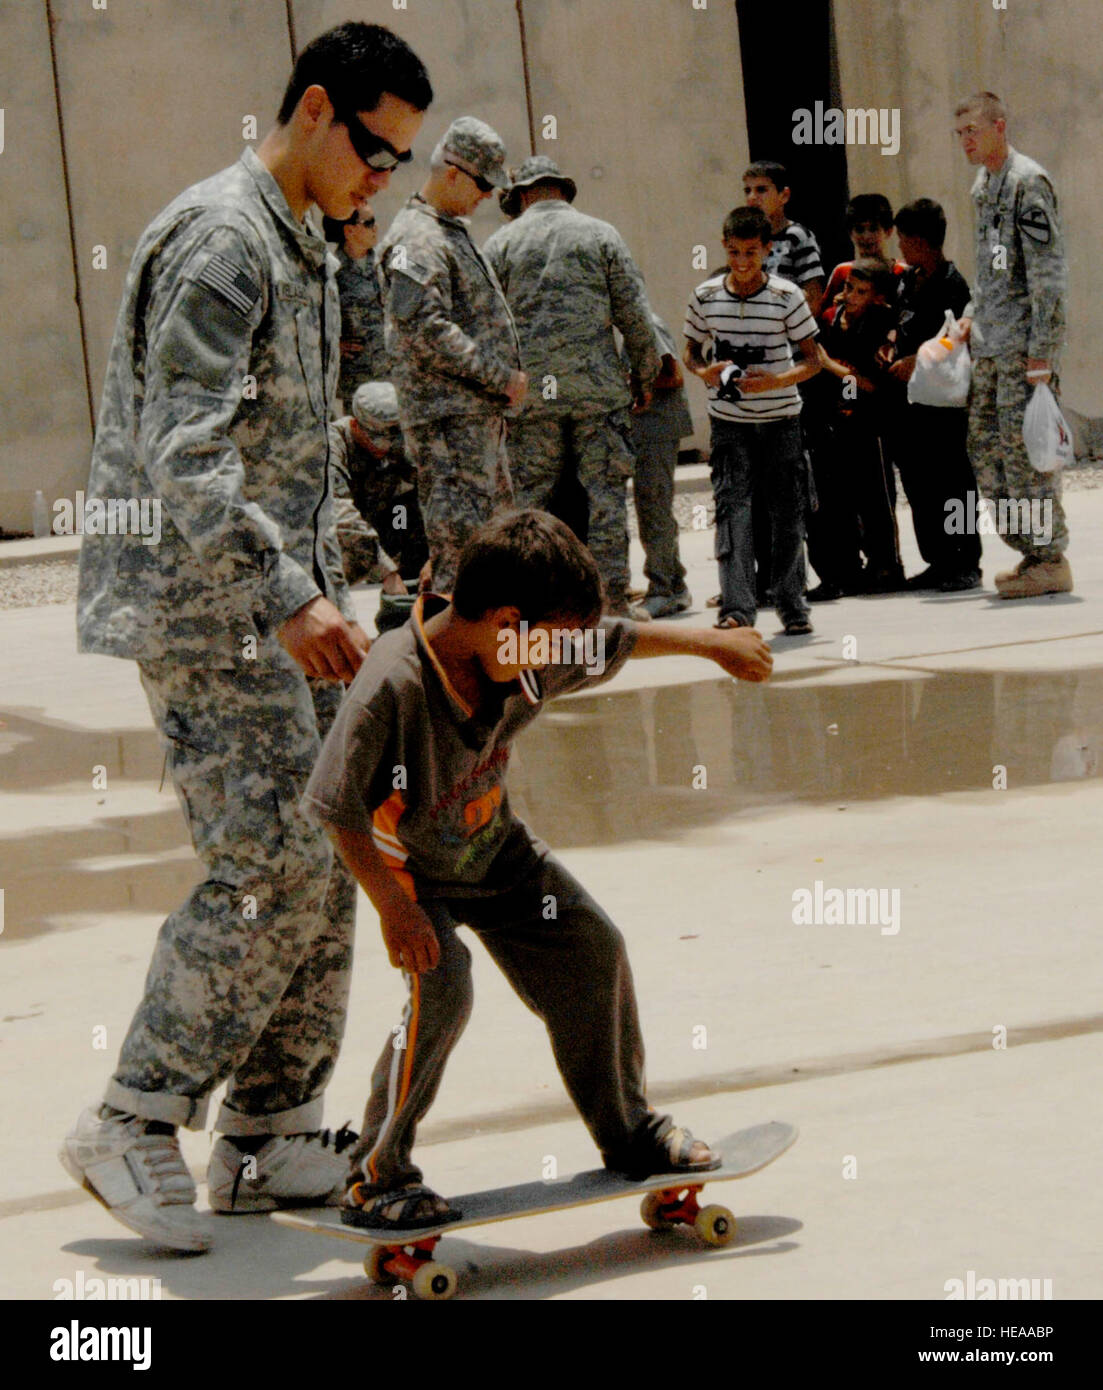 A U.S. Army soldier teaches an Iraqi boy how to skateboard during Iraqi Kids Day held, June 25, 2011, at Joint Base Balad, Iraq. More than 100 volunteers from across JBB volunteered to spend a few hours with the children and learn about their culture while the children learned a little about the military and American culture. Stock Photo